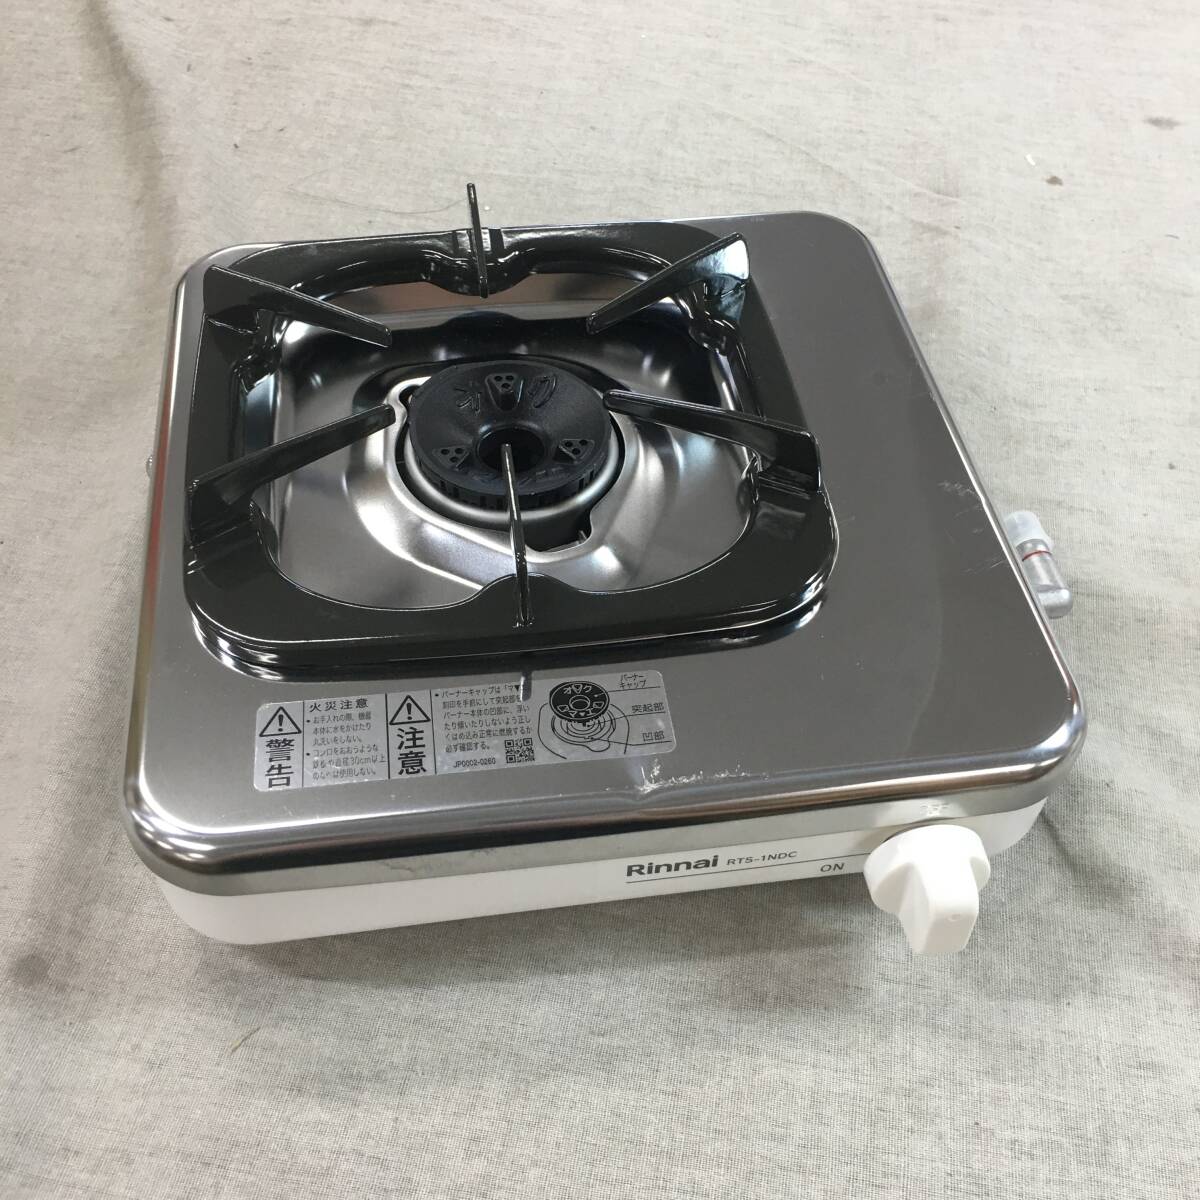  present condition goods Rinnai gas-stove one . portable cooking stove RTS-1NDC(13A) city gas 12A/13A for 